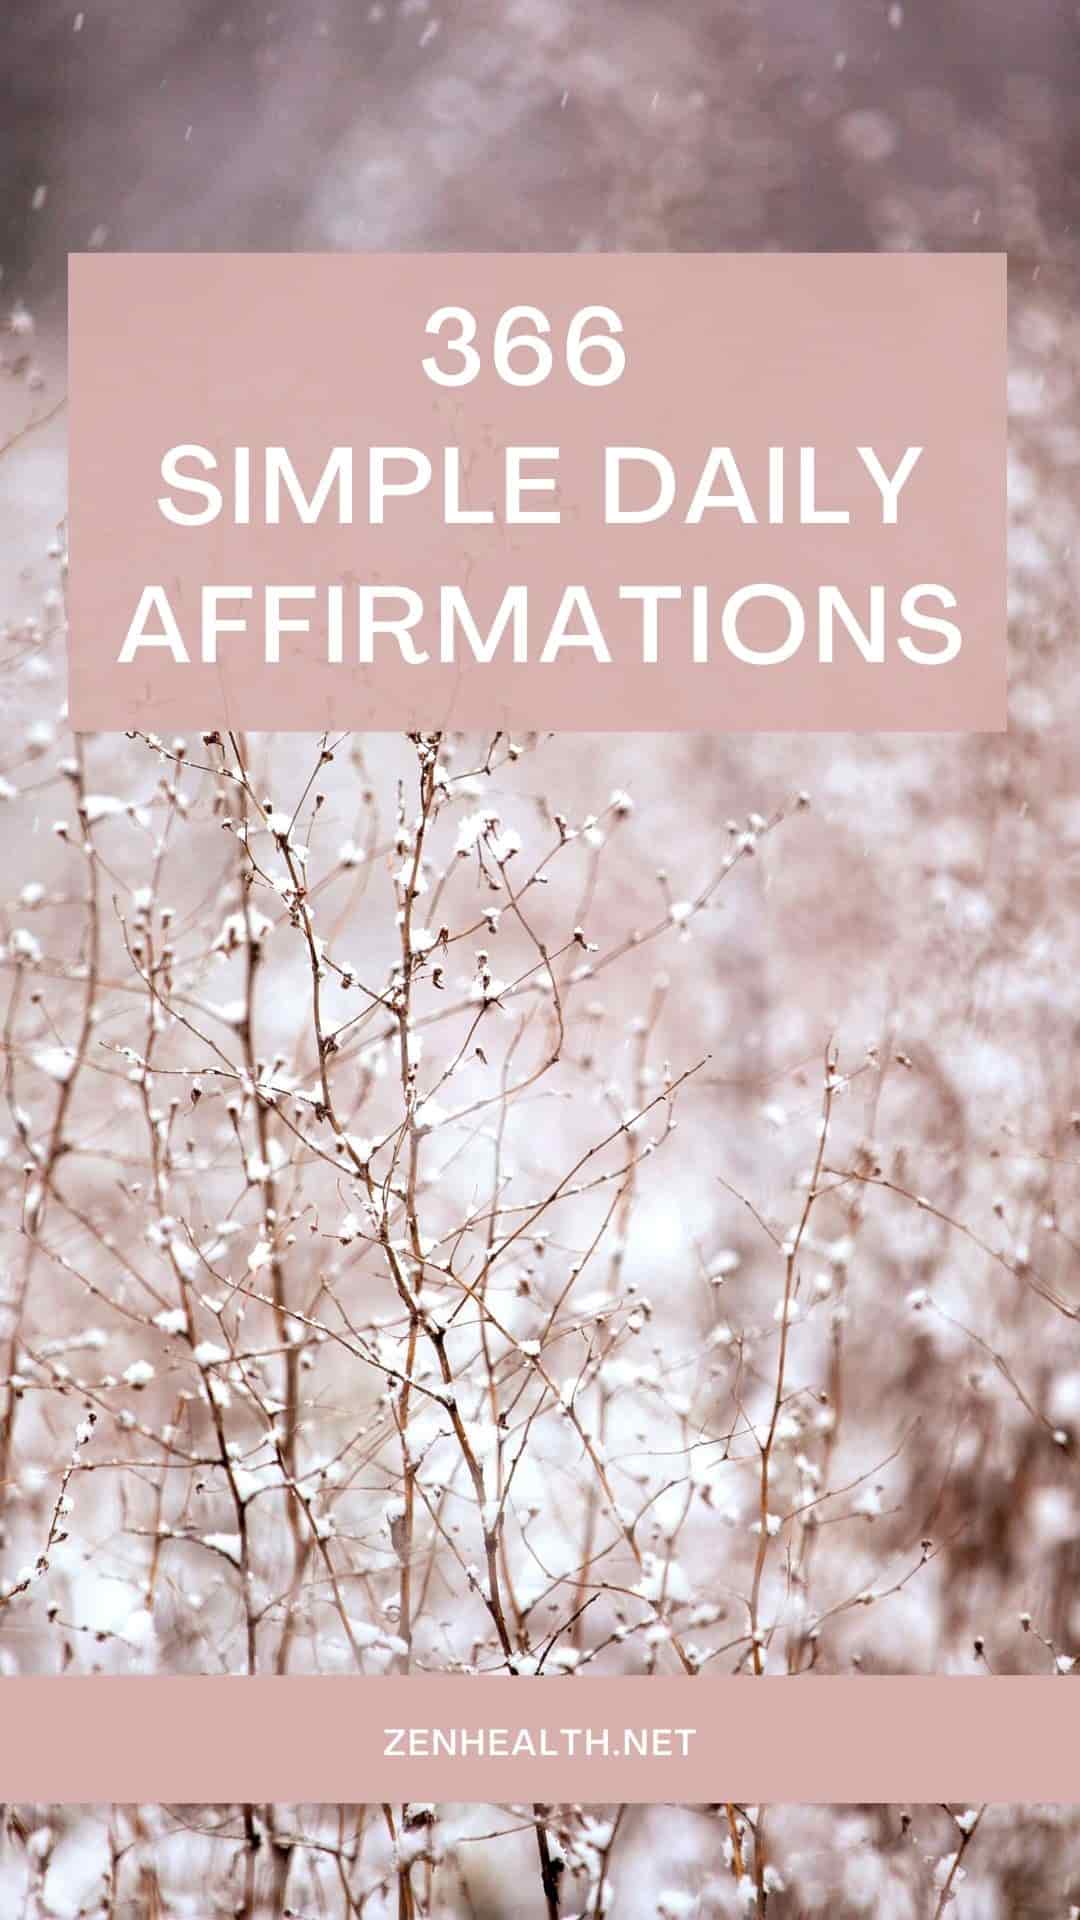 366 simple daily affirmations pin